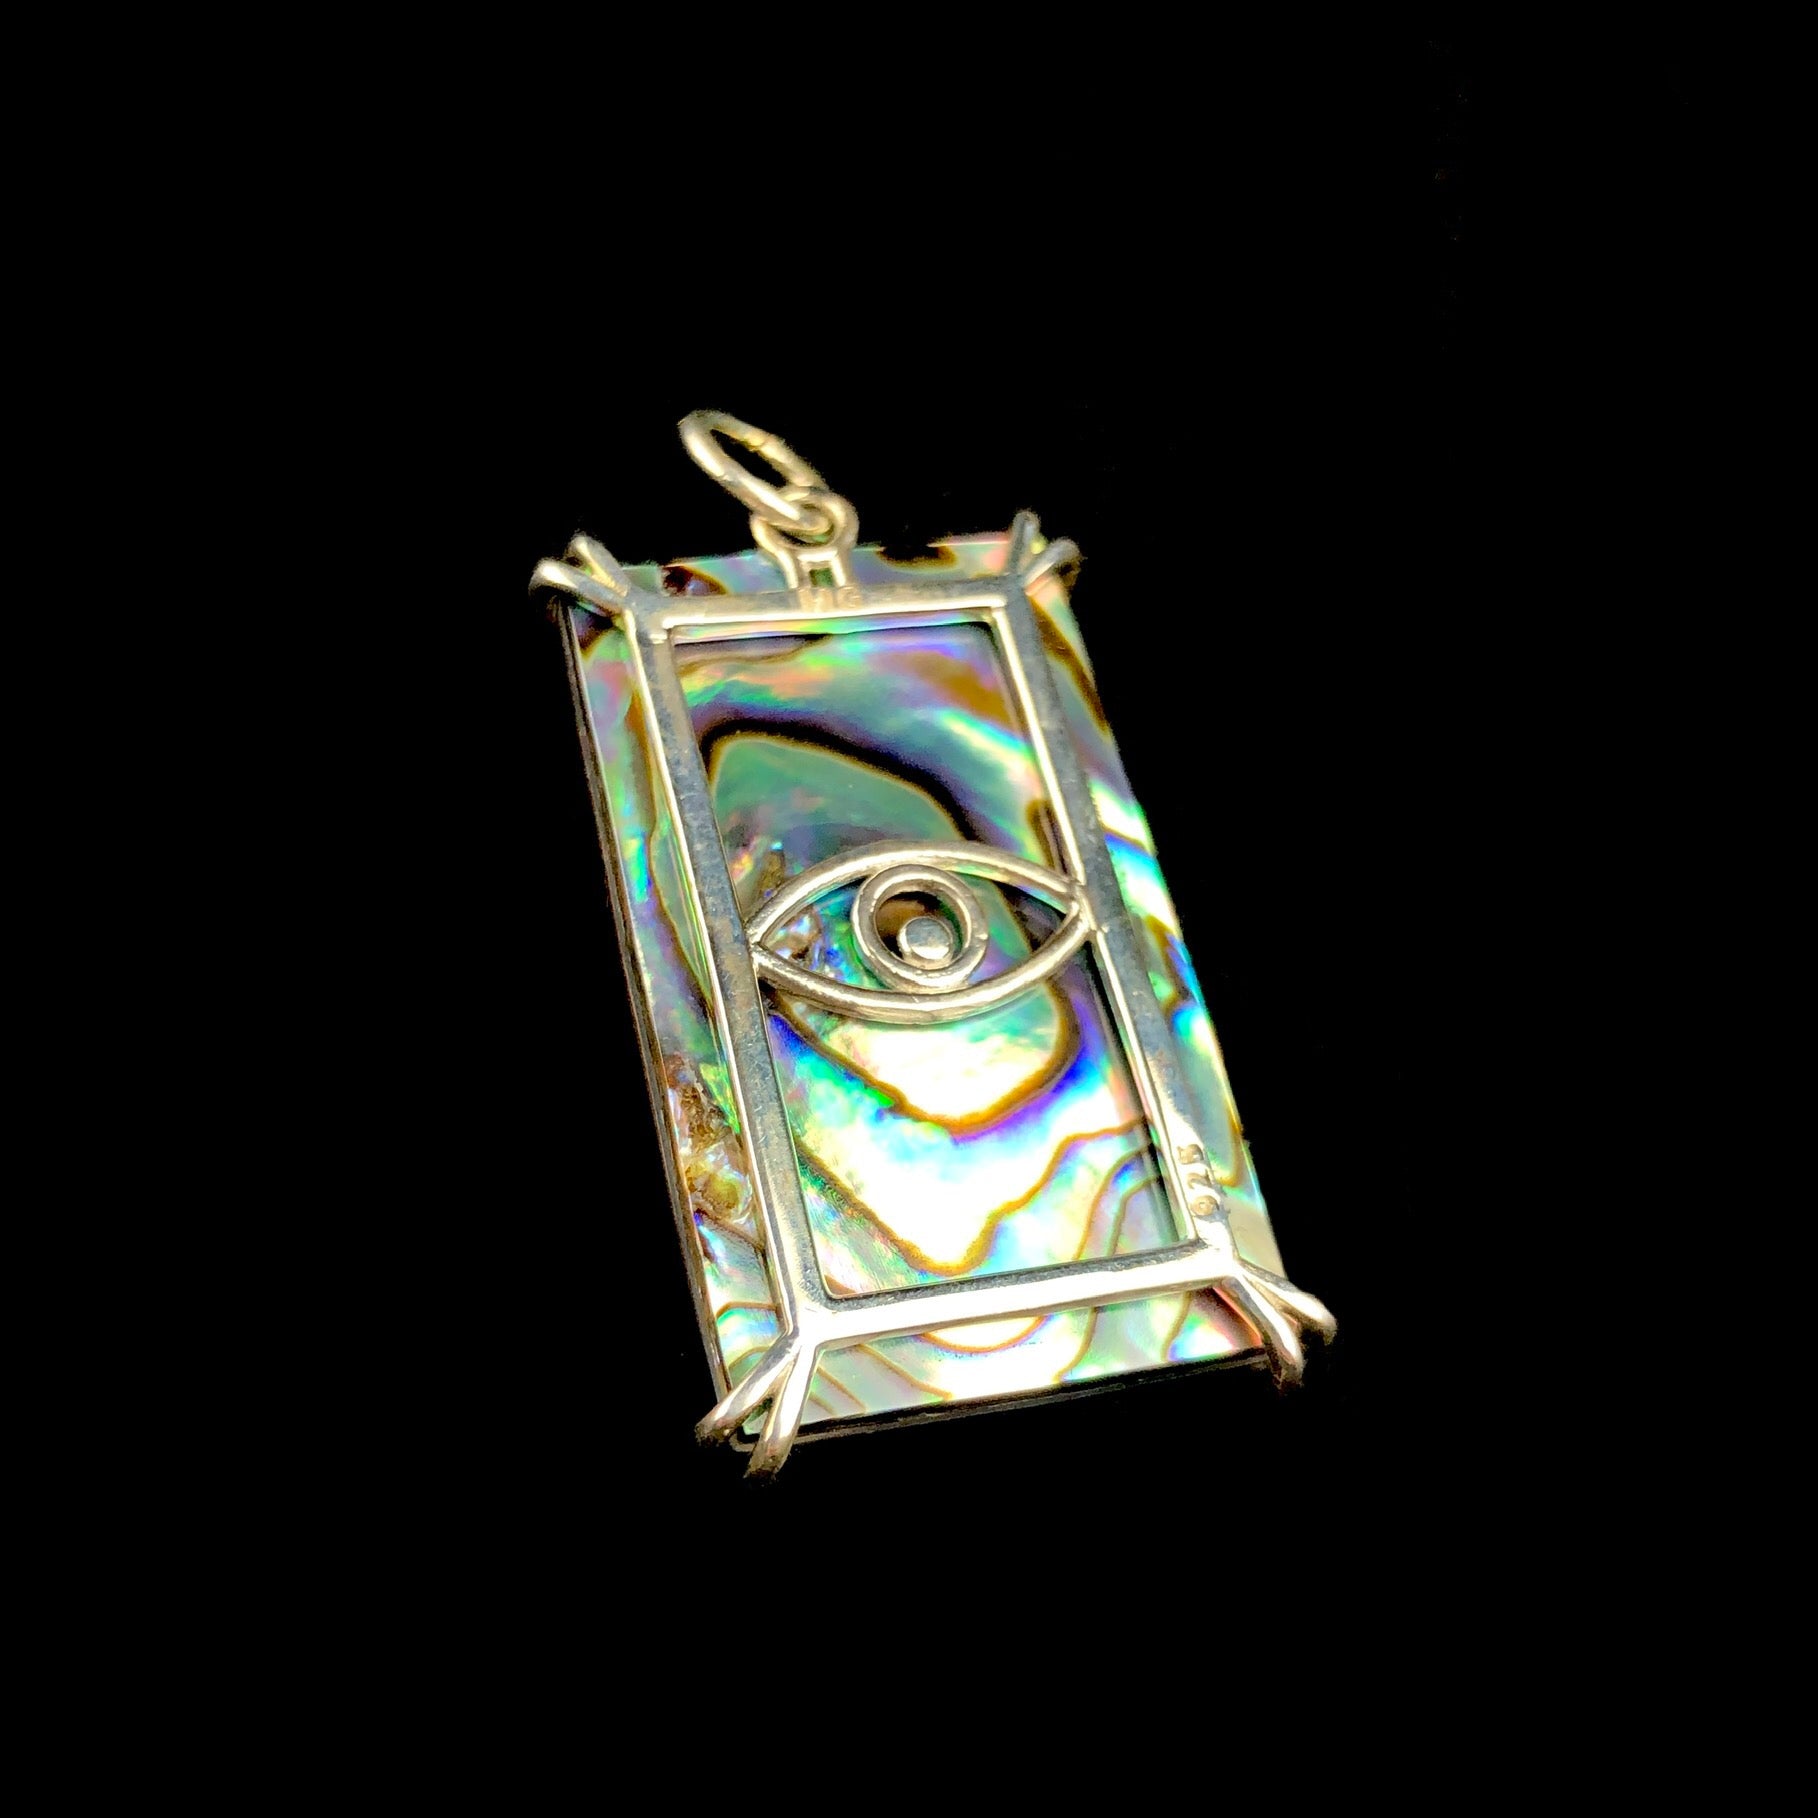 Back view of Sacred Hand Tablet Charm pendant with silver setting